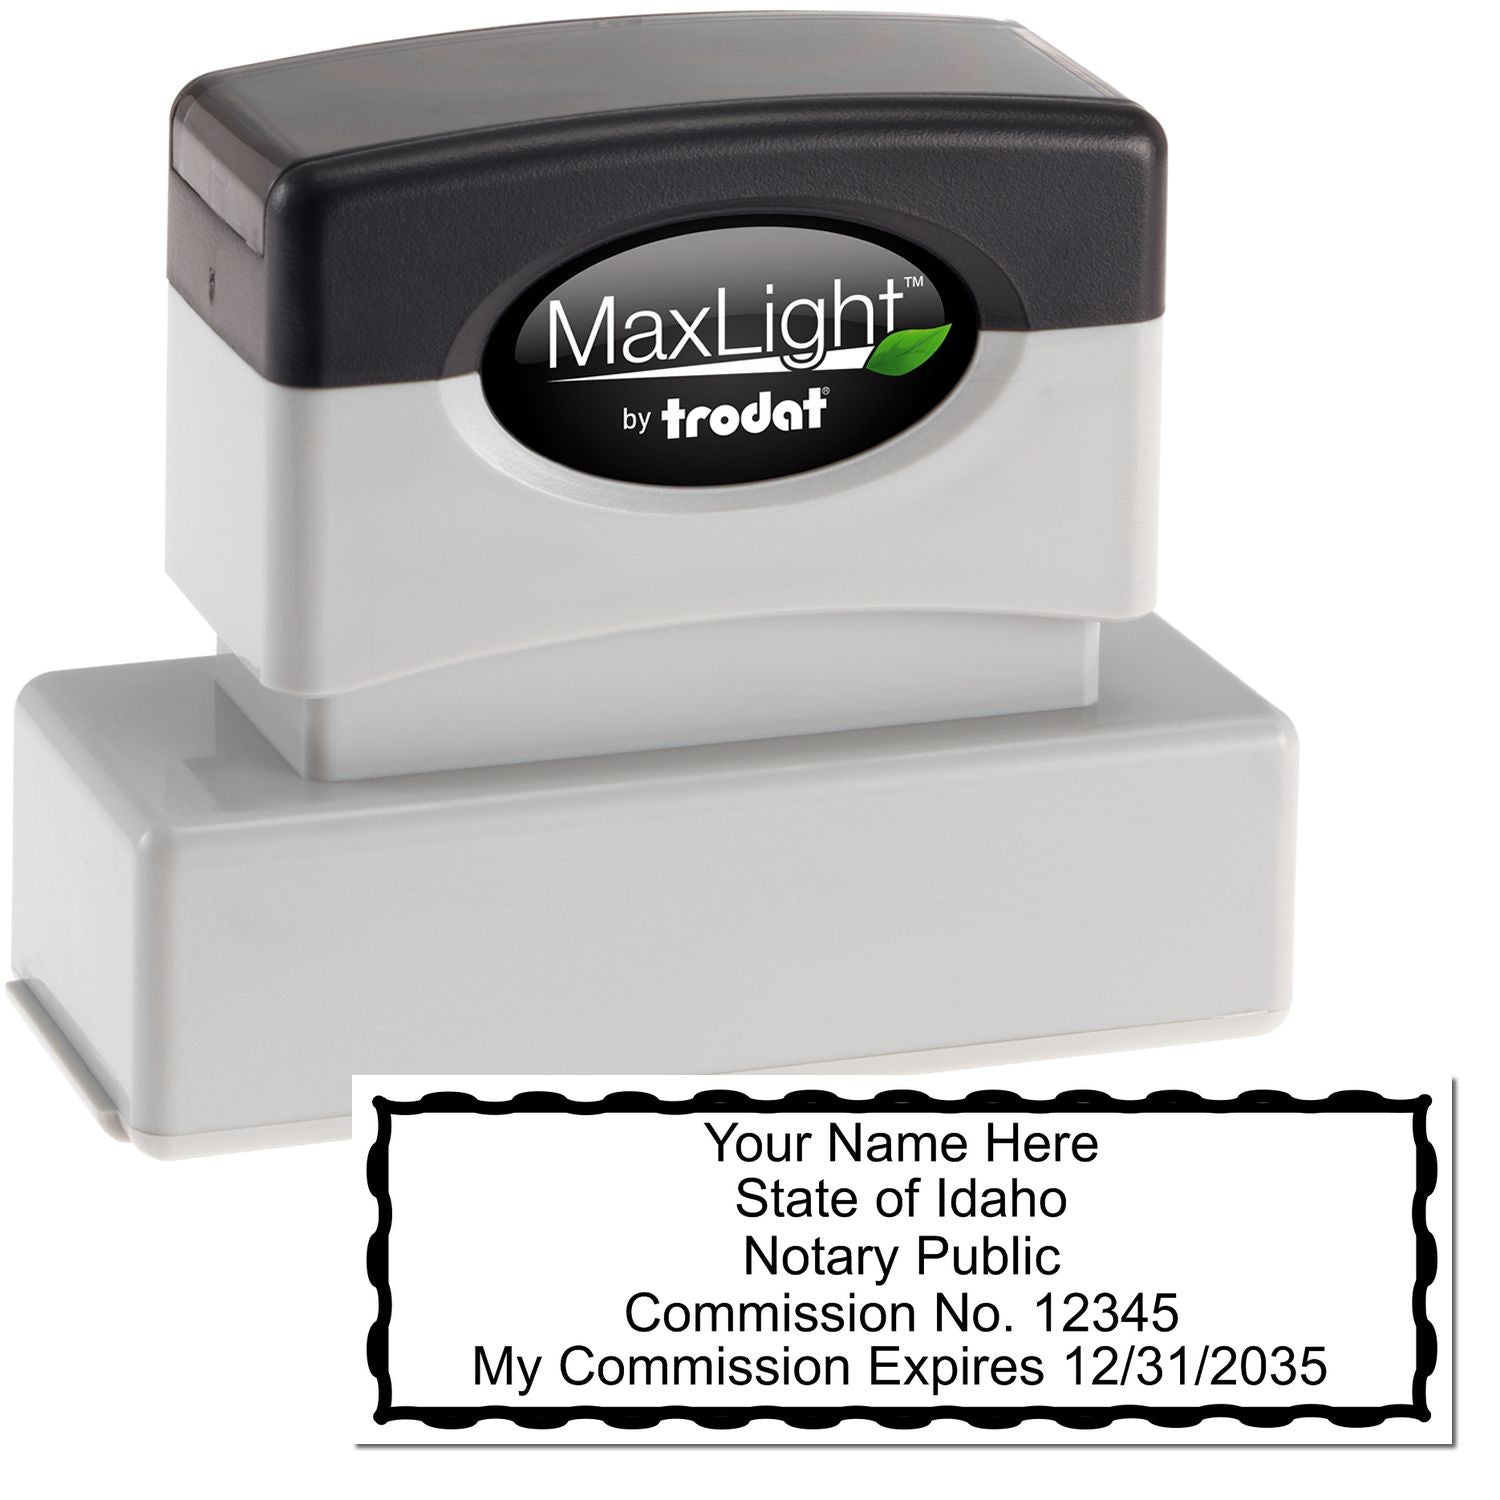 The main image for the MaxLight Premium Pre-Inked Idaho Rectangular Notarial Stamp depicting a sample of the imprint and electronic files